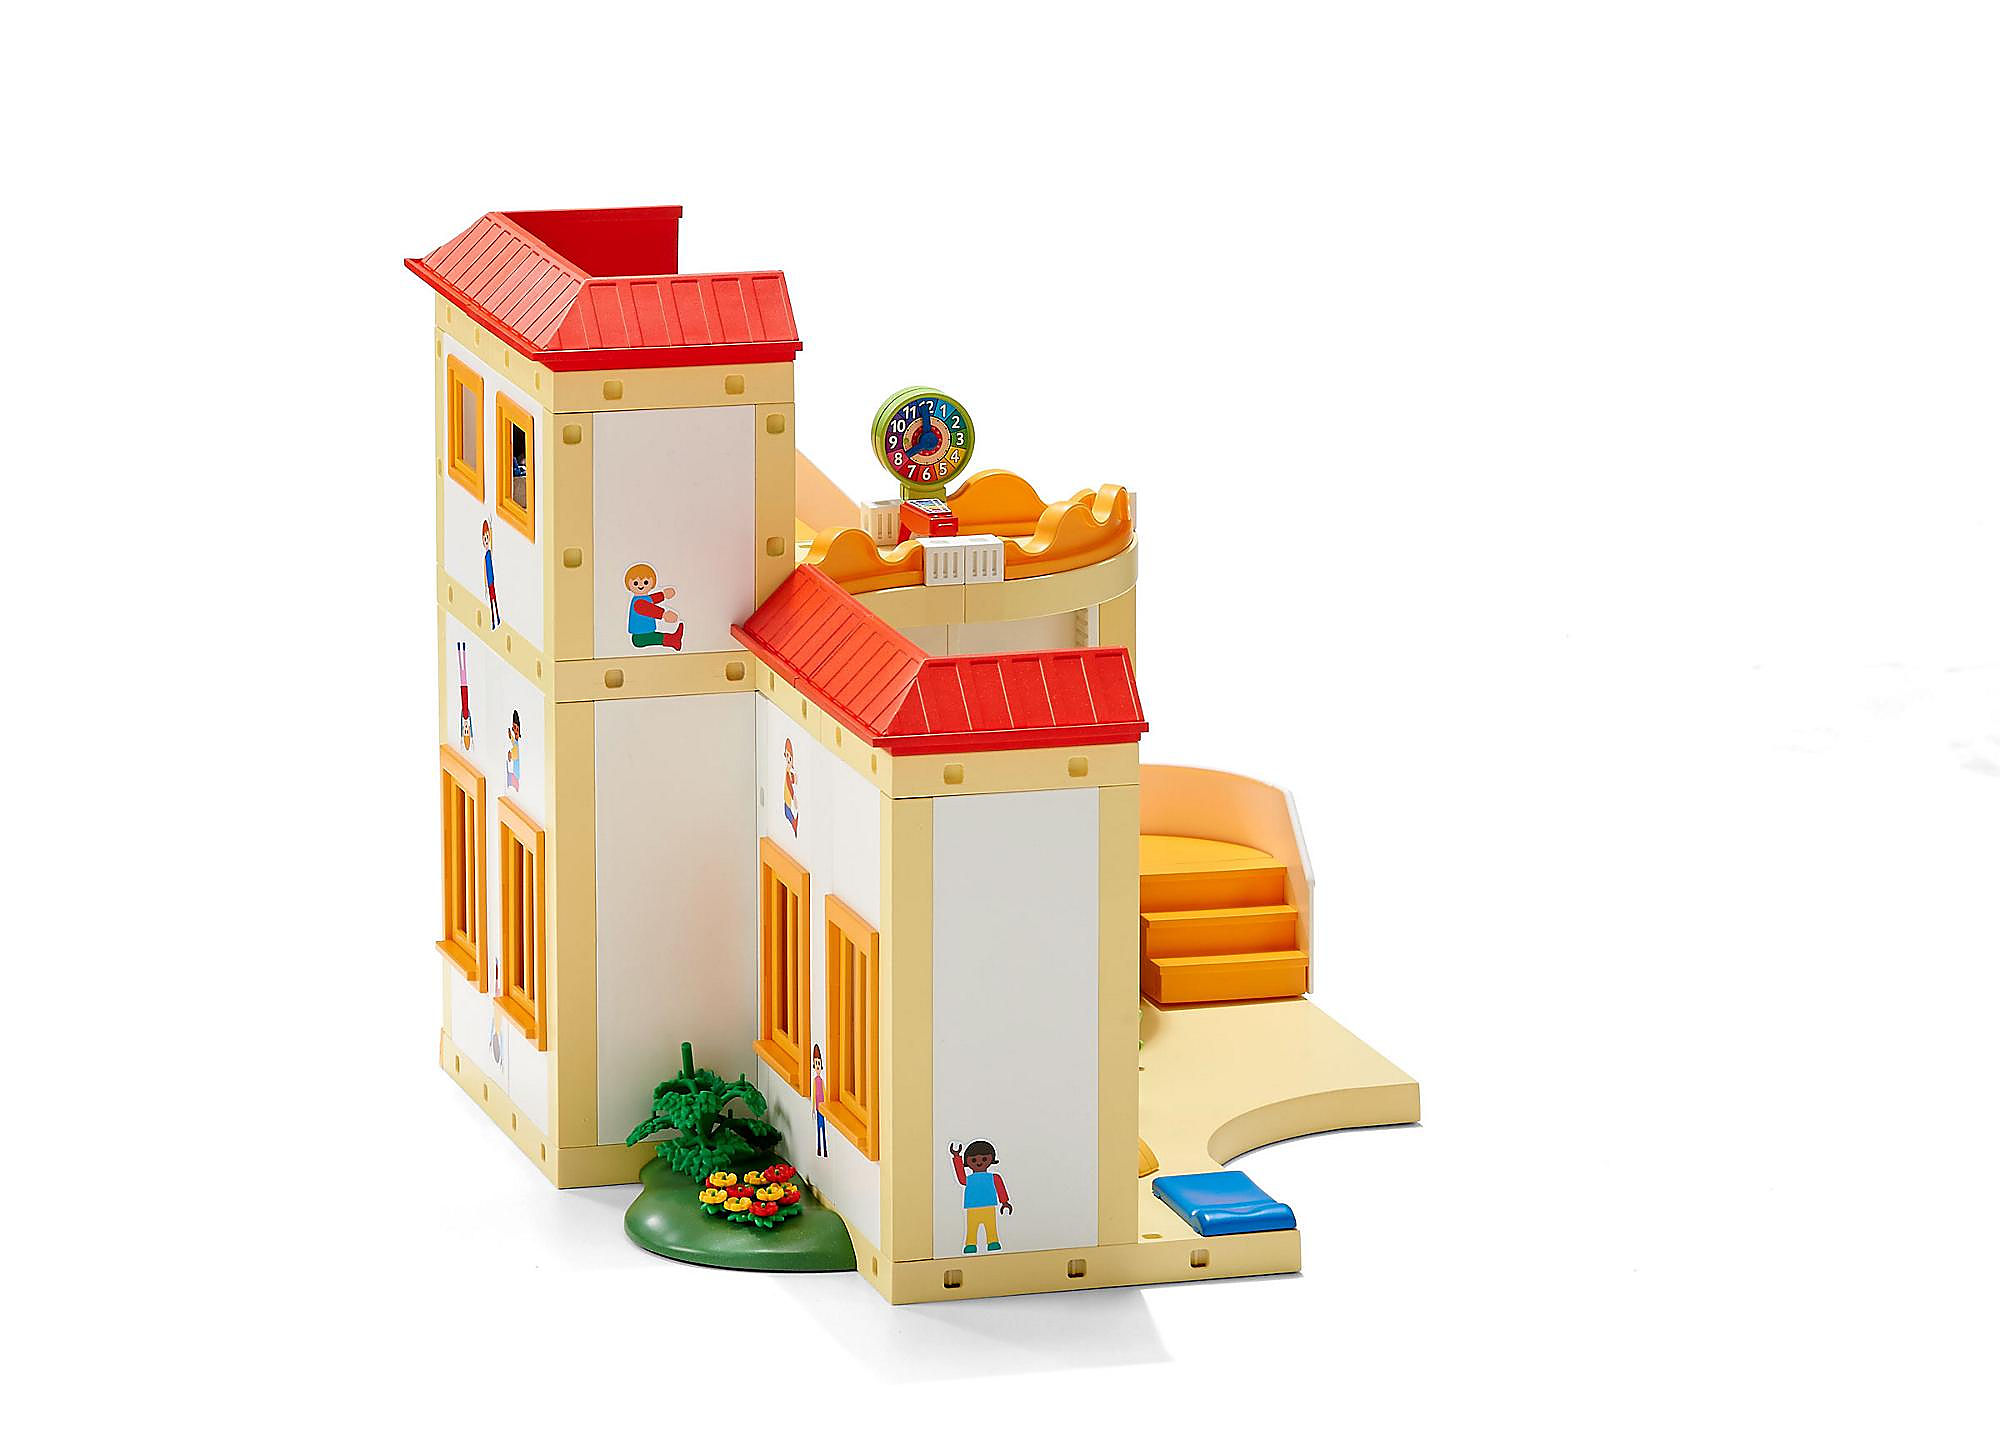 Playmobil Garderie 5567 pas cher - Achat neuf et occasion